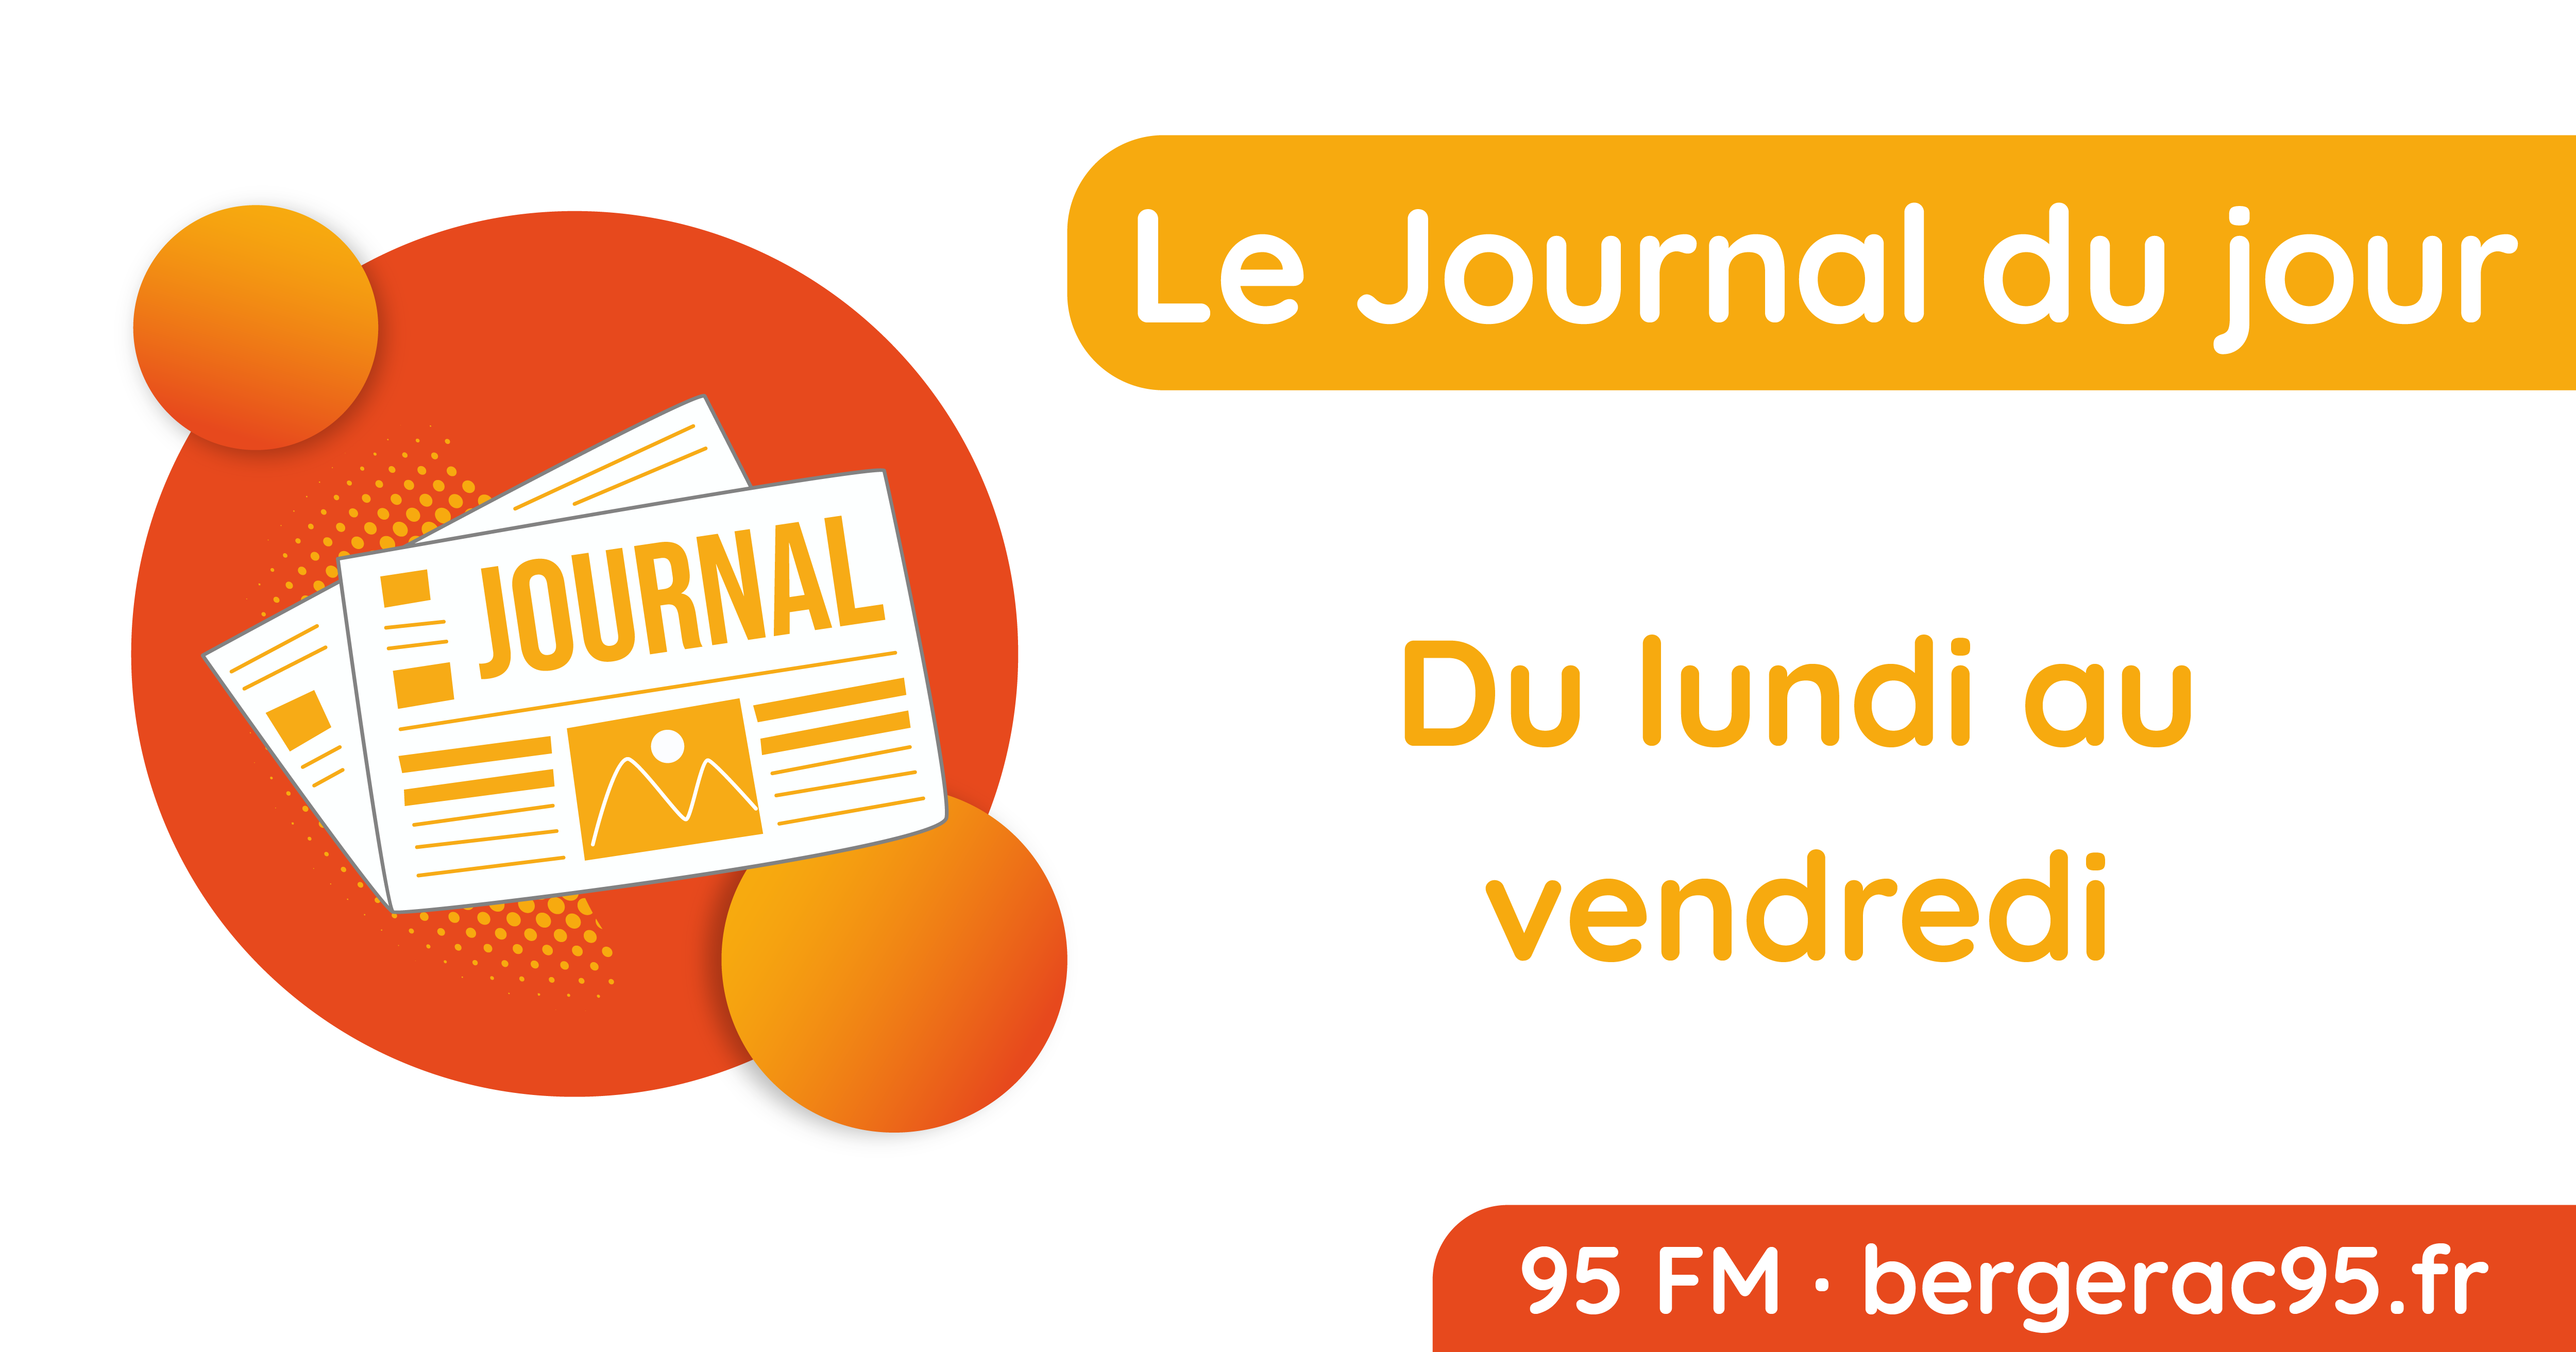 You are currently viewing Le journal du mercredi